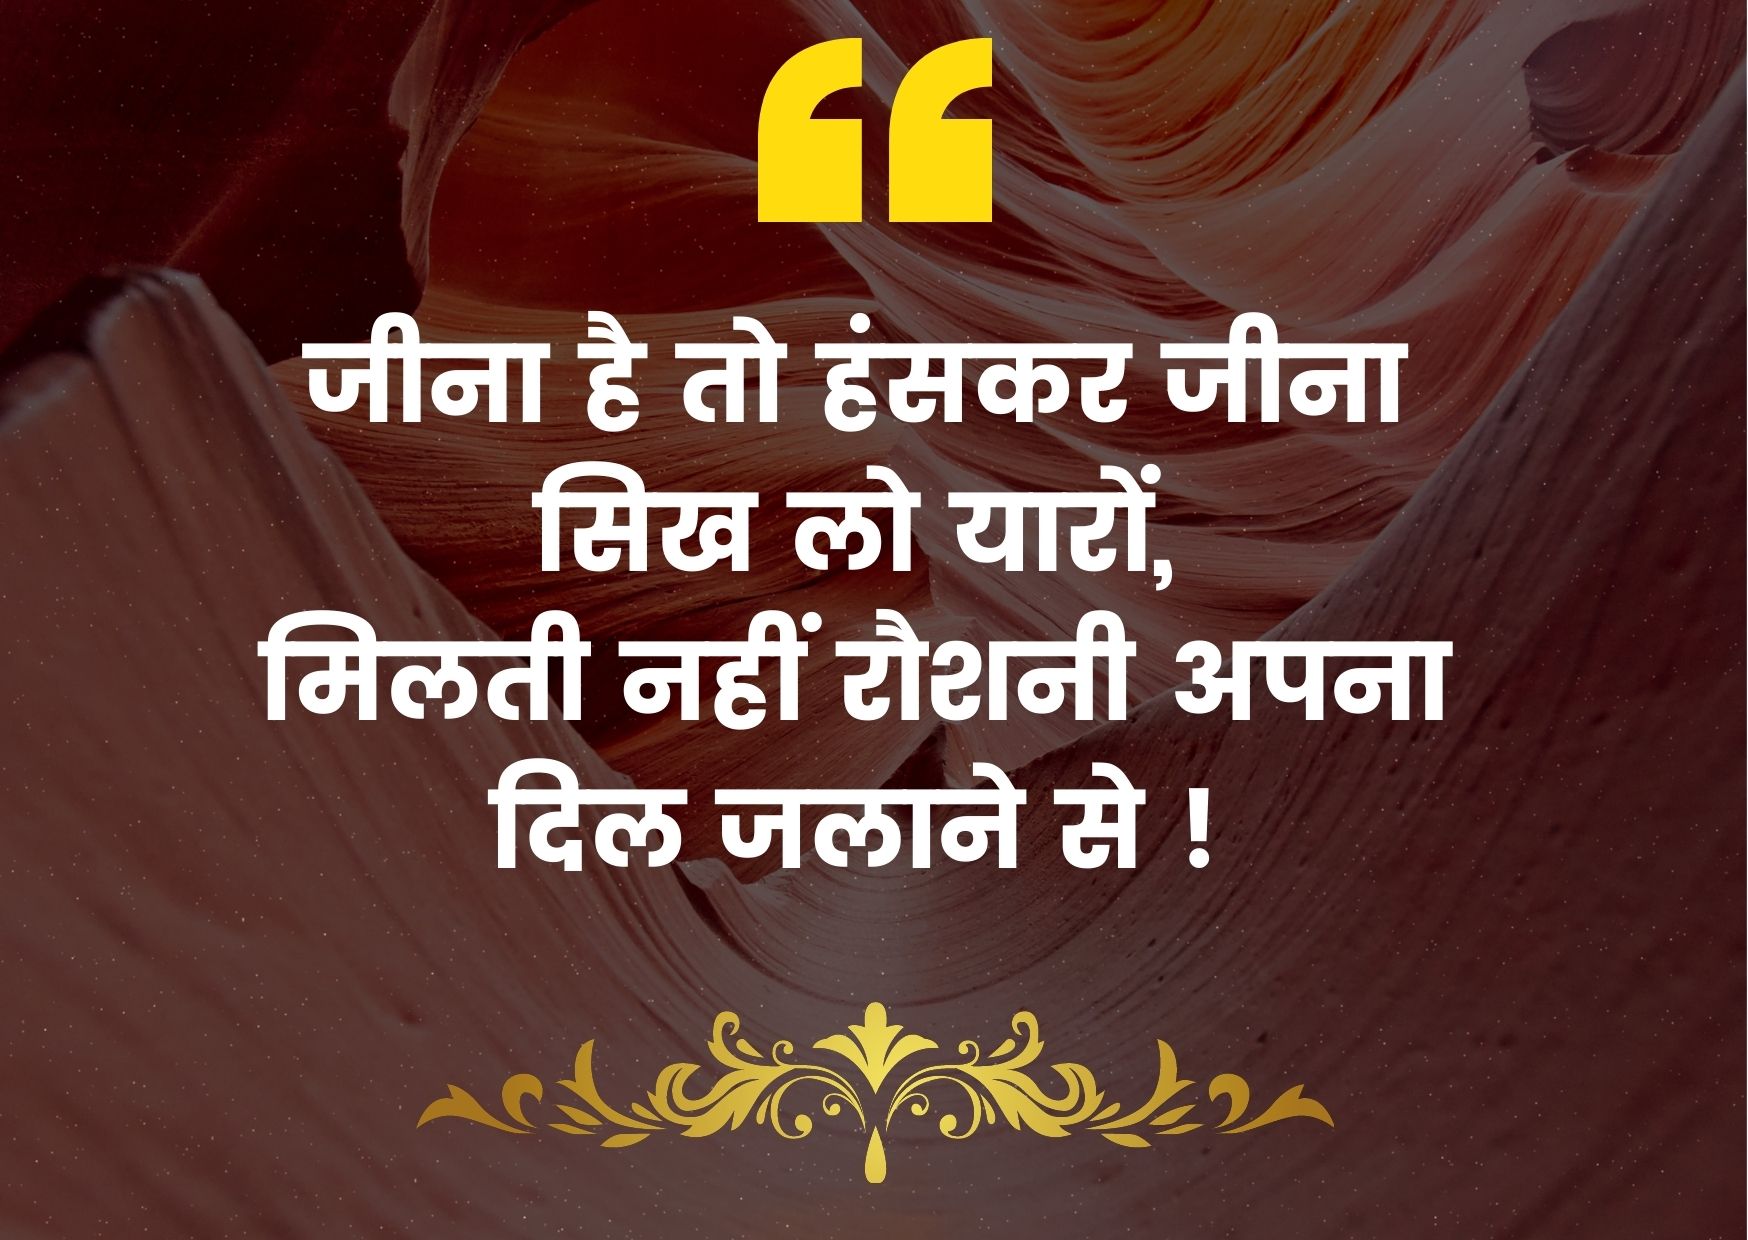 Life quotes in hindi | Life motivational quotes in hindi | Best Life